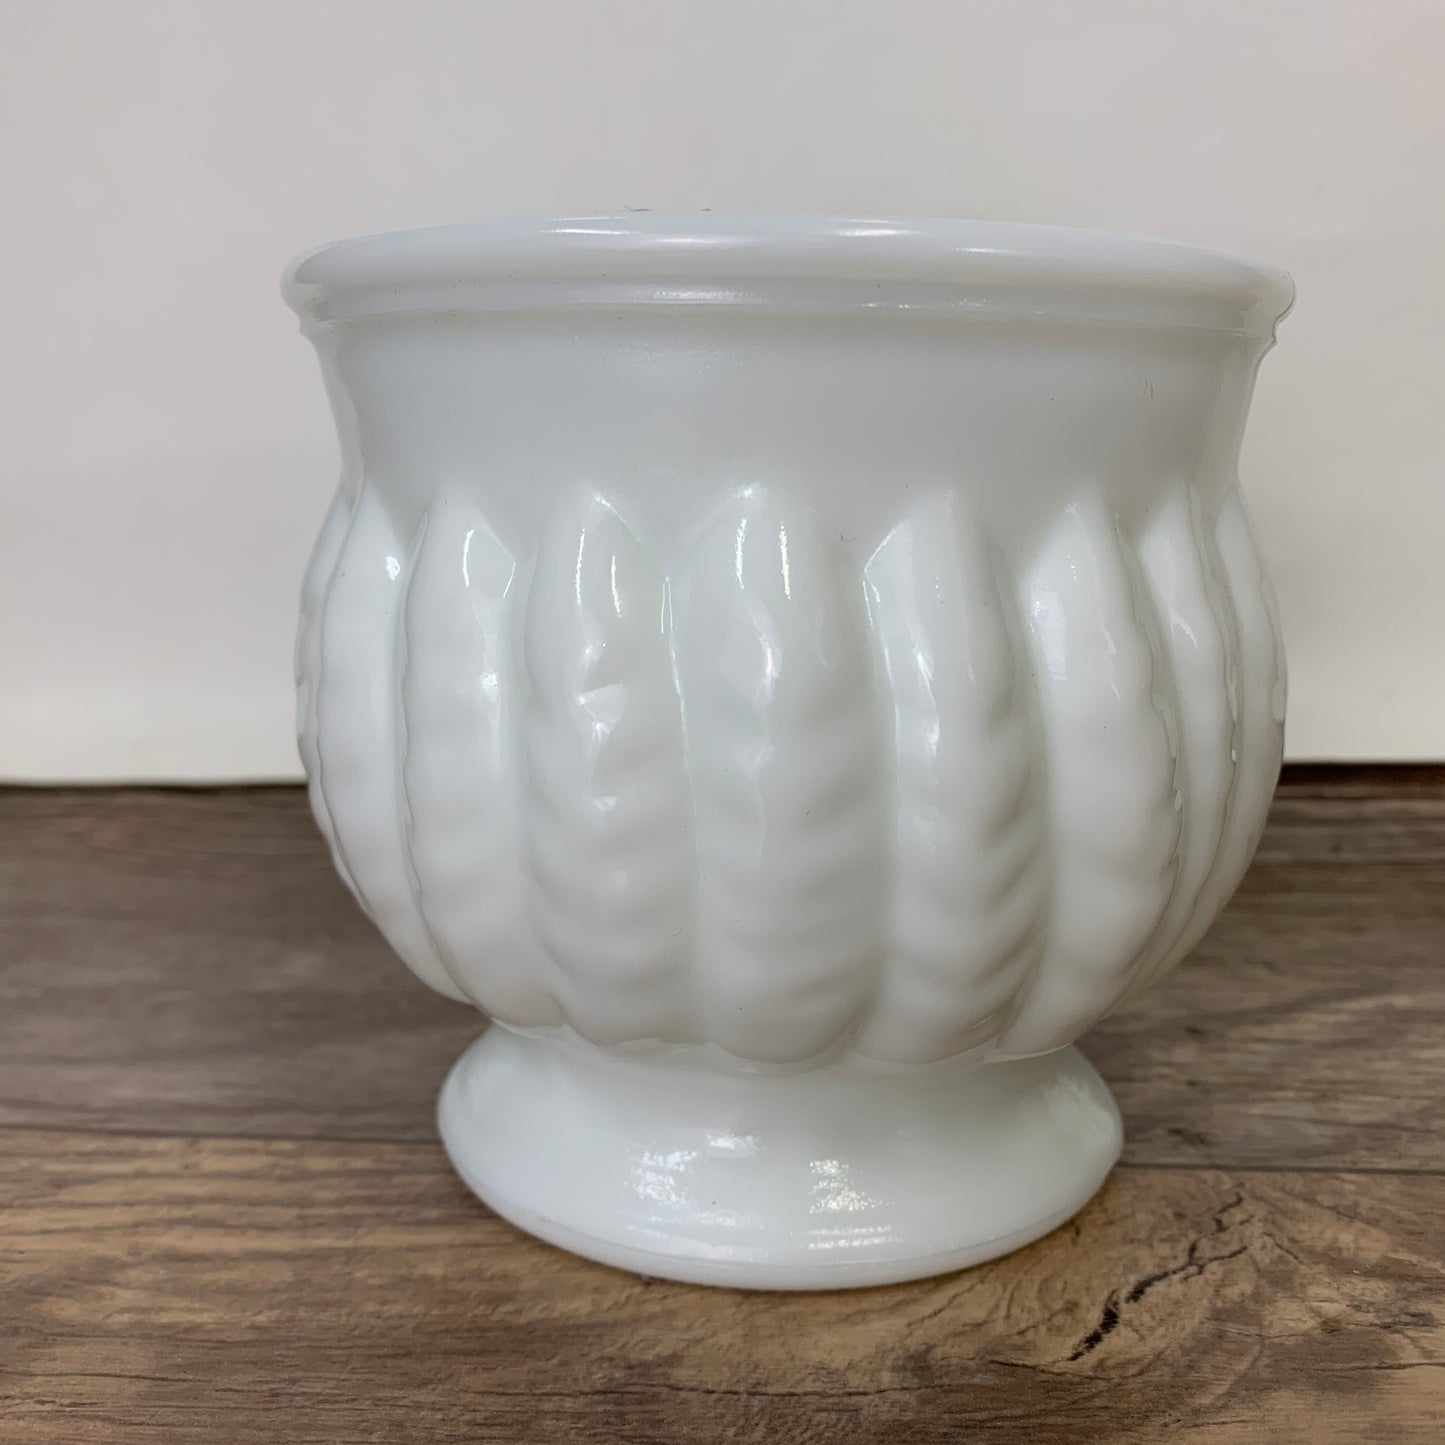 Small Milk Glass Planter, Randall Milk Glass Planter with Feather Pattern